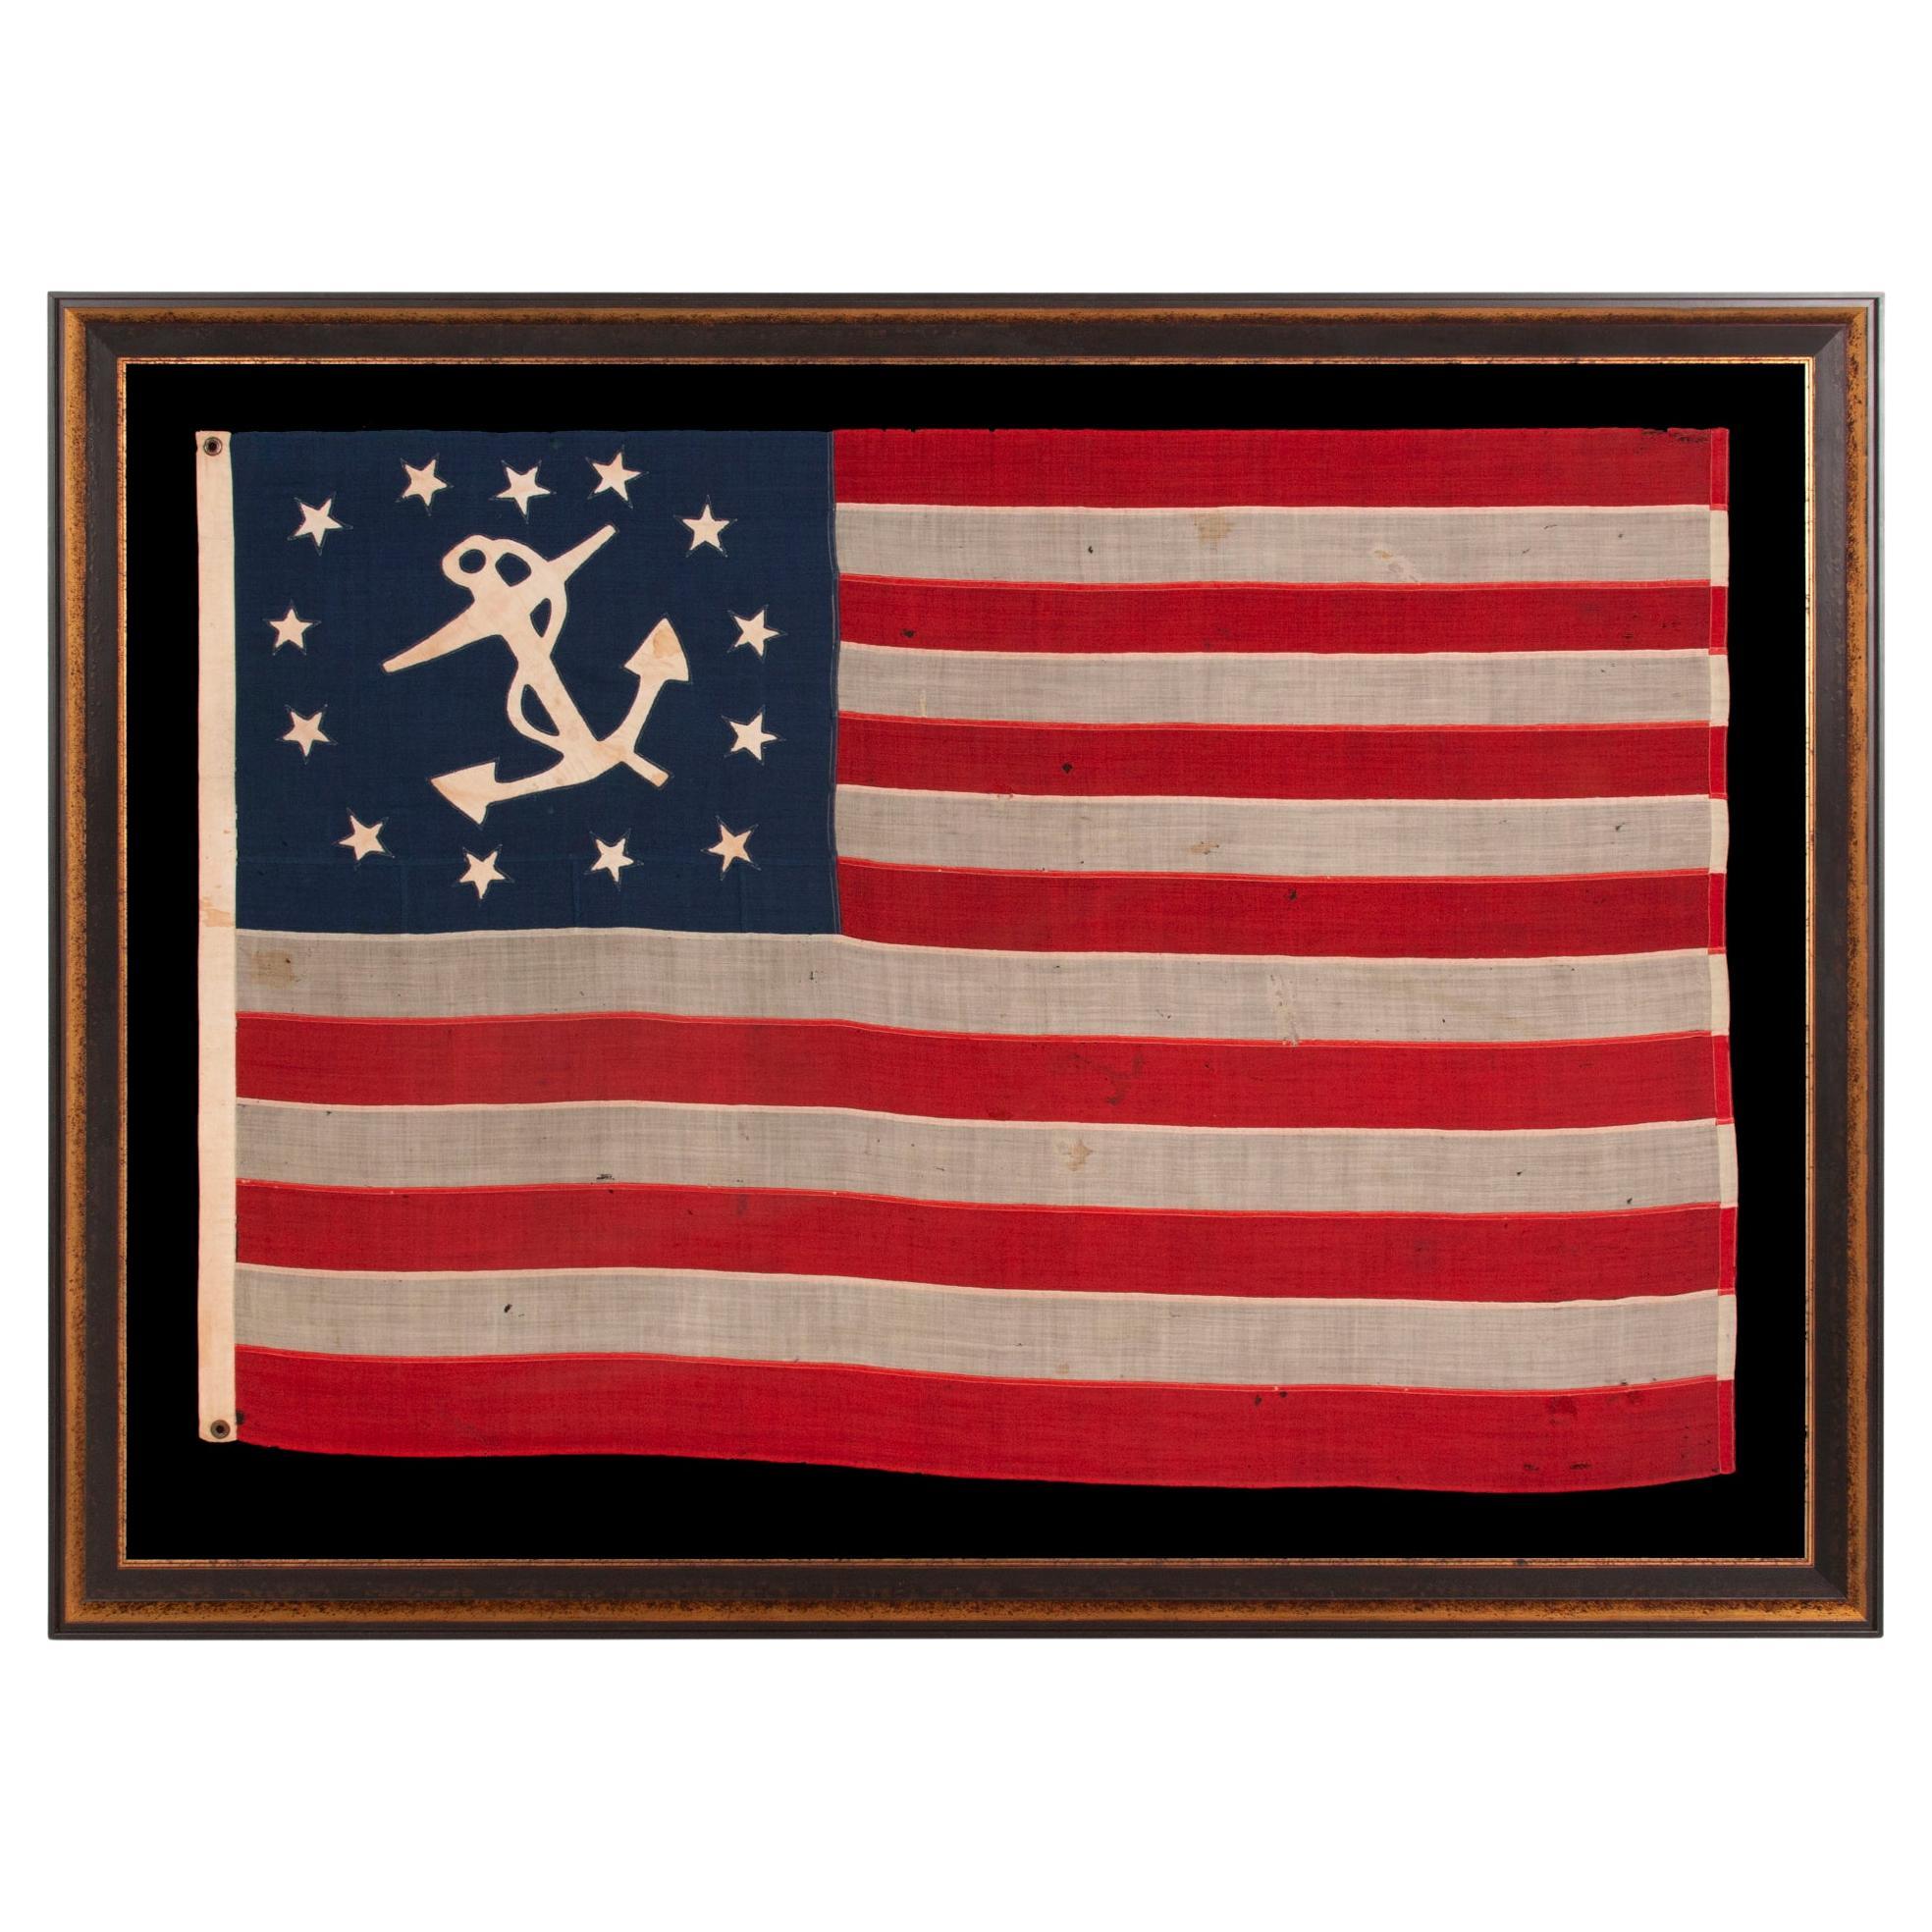 Outstanding 13 Star Hand-sewn American Private Yacht Flag, ca 1865-1885